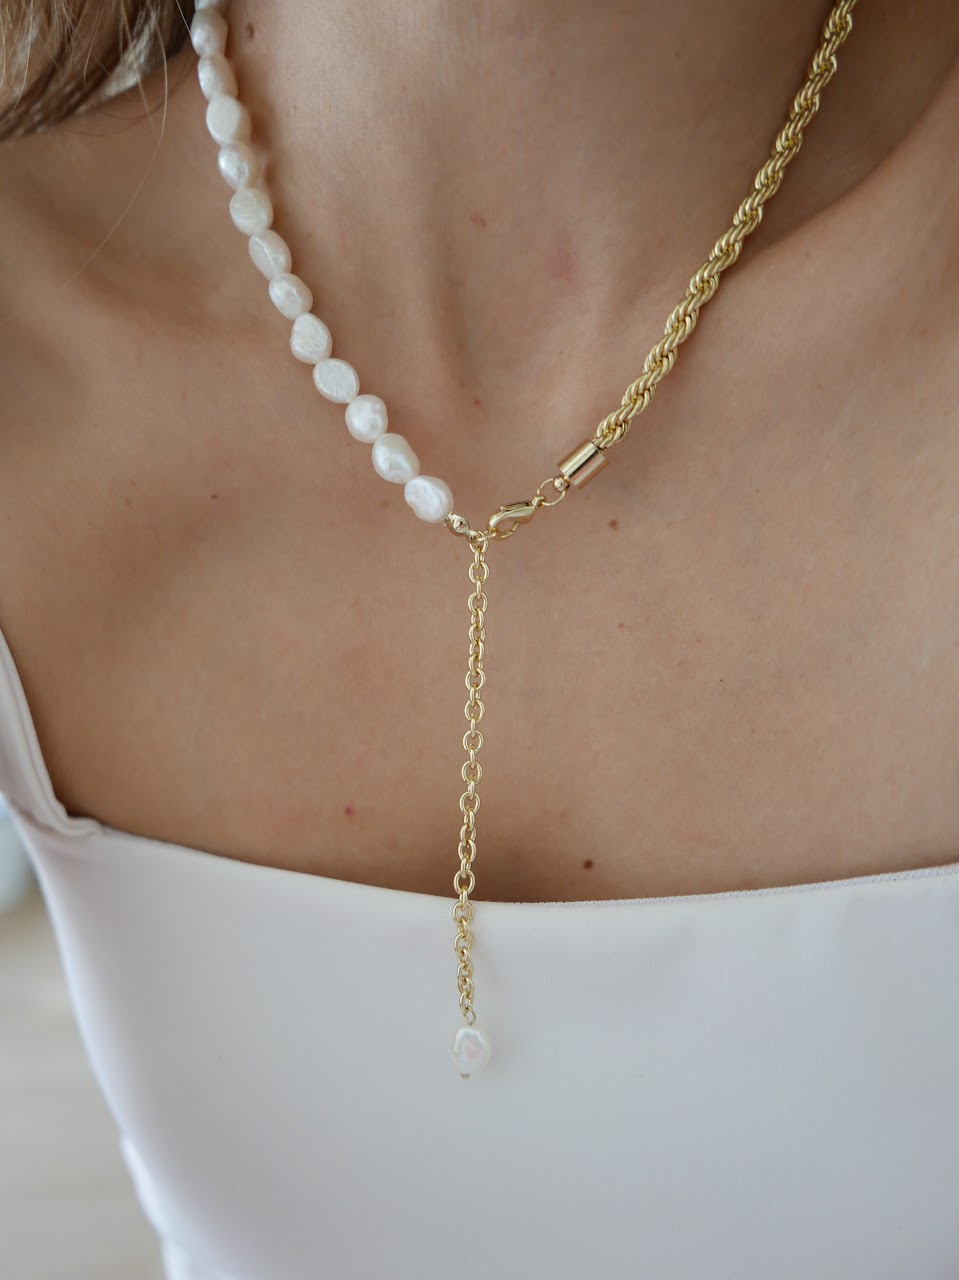 The Strand of Pearls